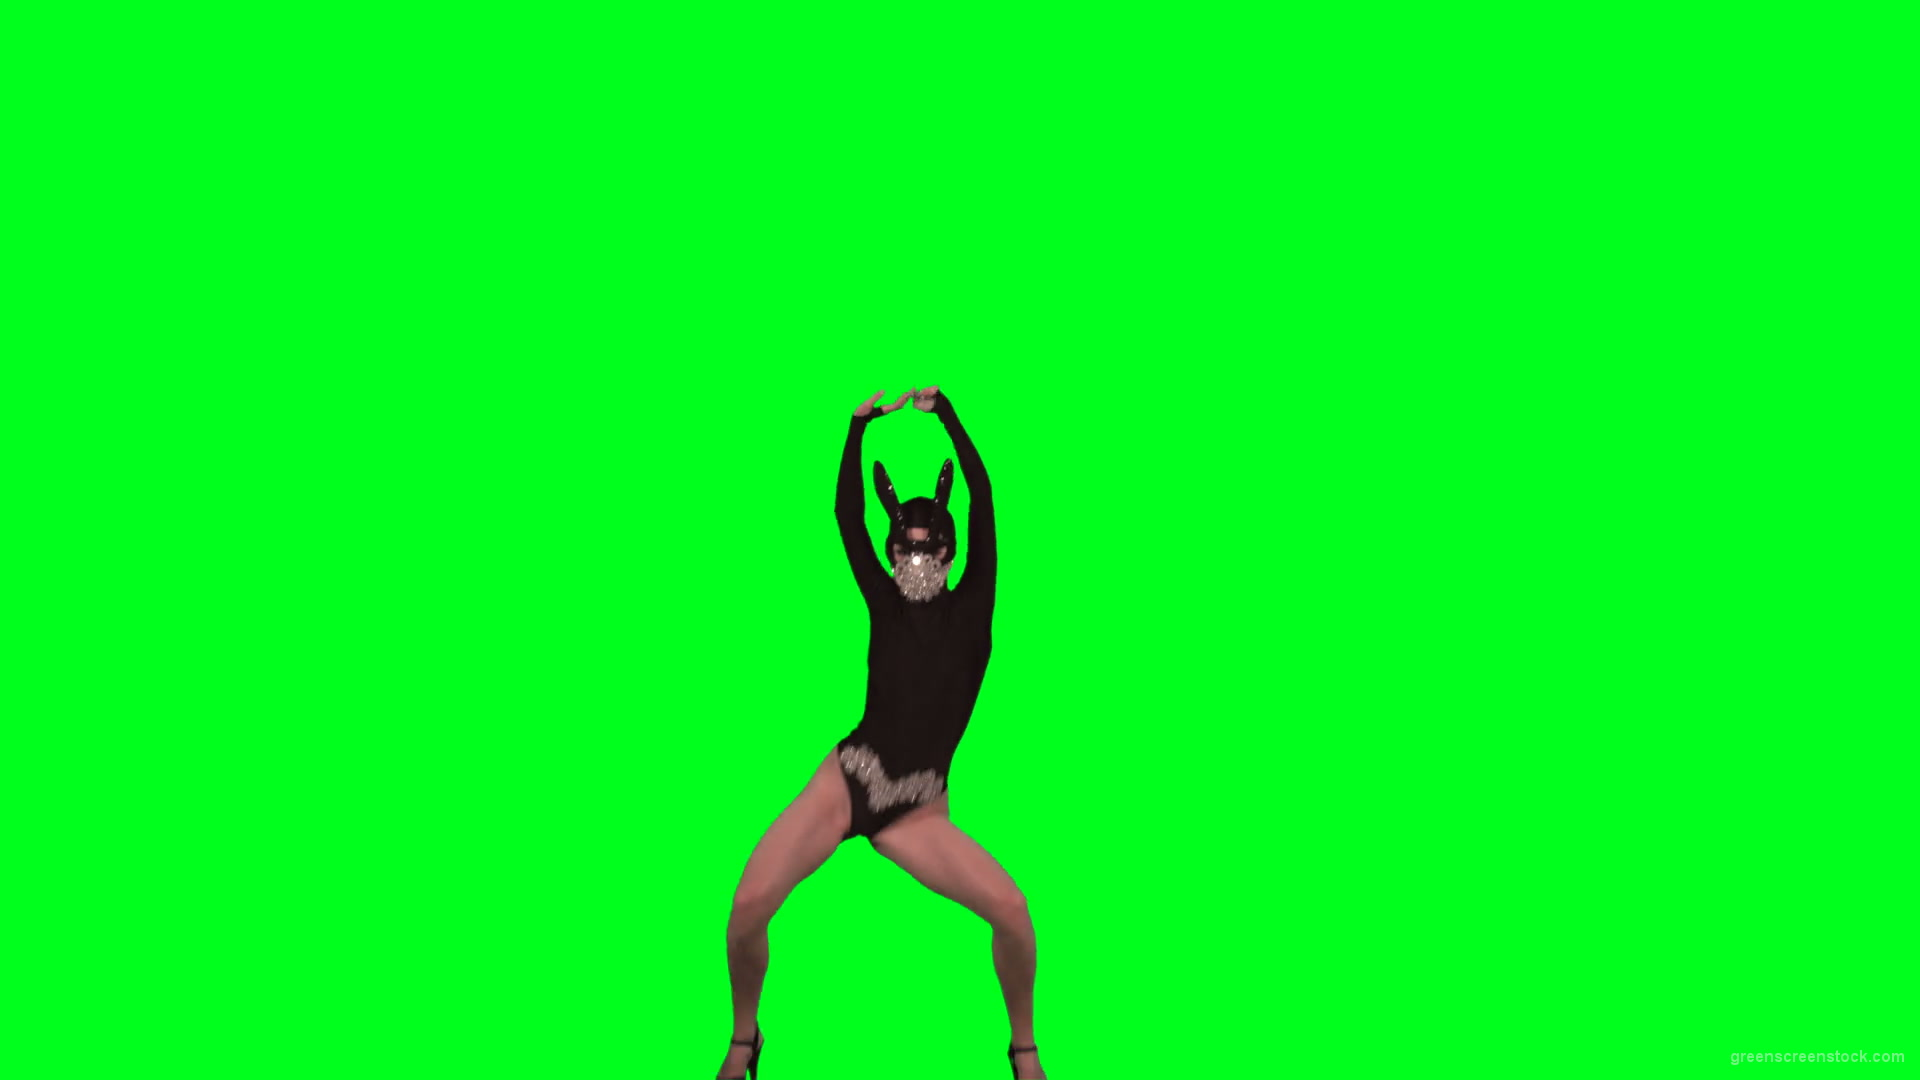 Rave-Calling-EDM-Go-Go-Dancing-Girl-performs-on-green-screen-4K-Video-Footage-1920_002 Green Screen Stock